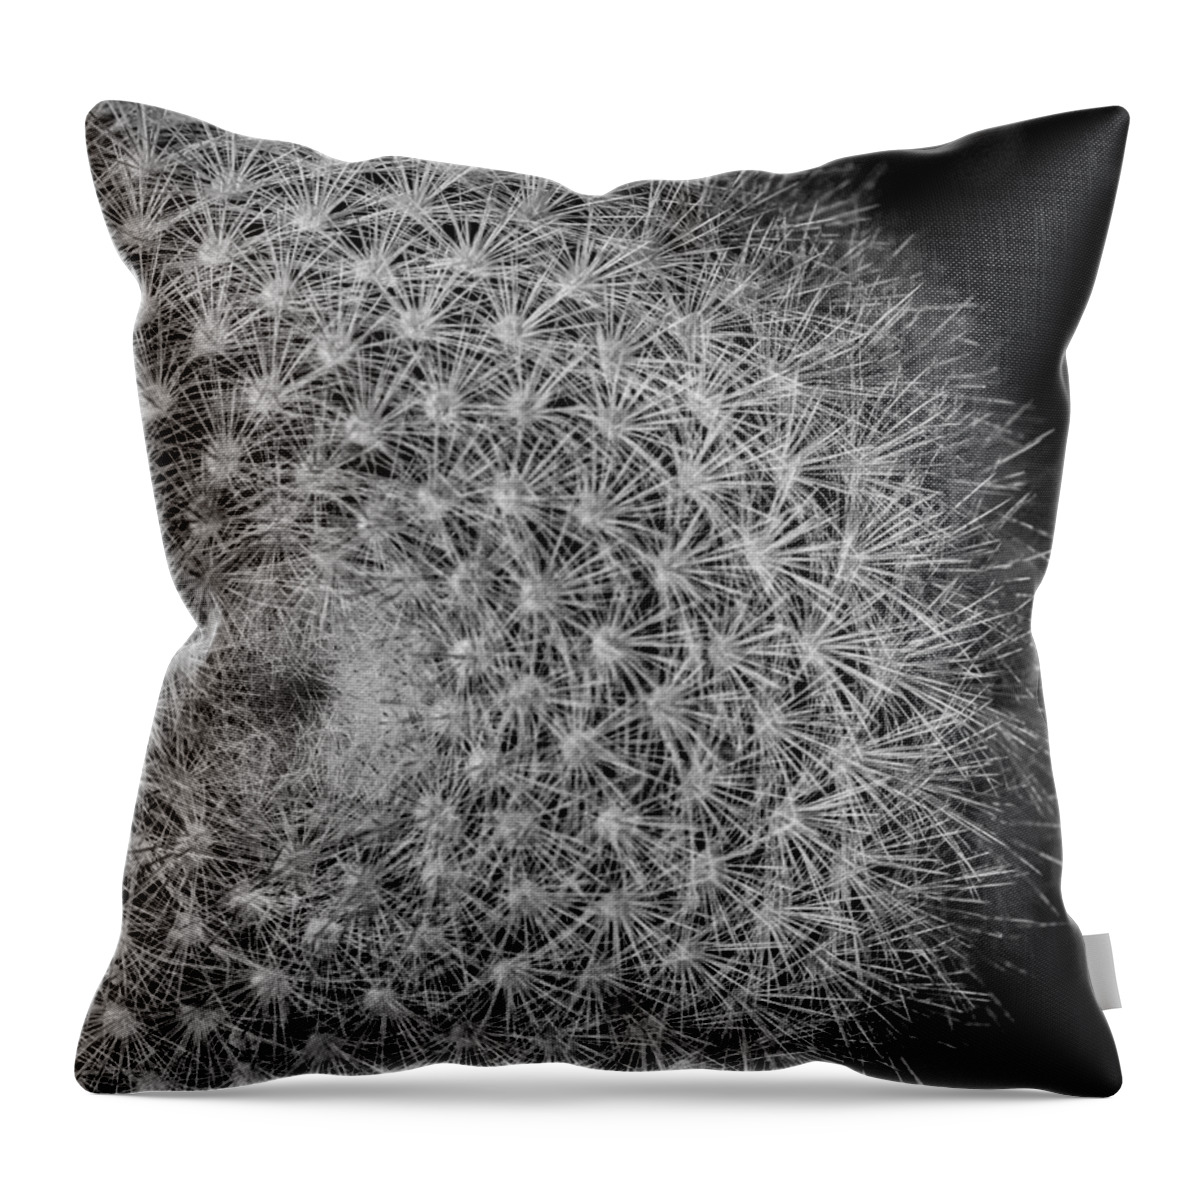 Abstract Throw Pillow featuring the photograph Spiky Moon by Ronda Broatch